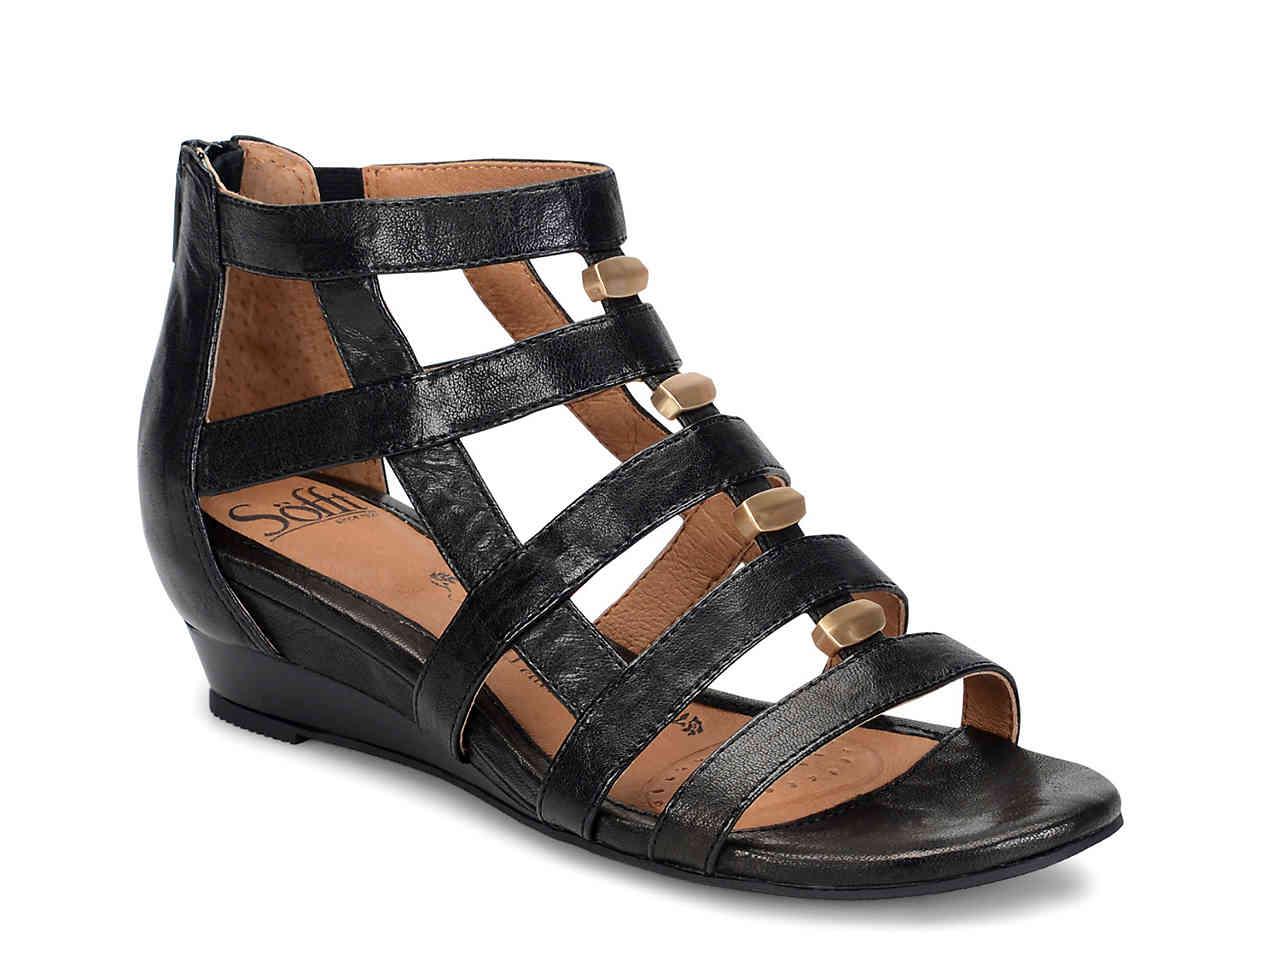 Söfft Rio Wedge Leather Sandal in Black Leather (Black) - Save 61% - Lyst